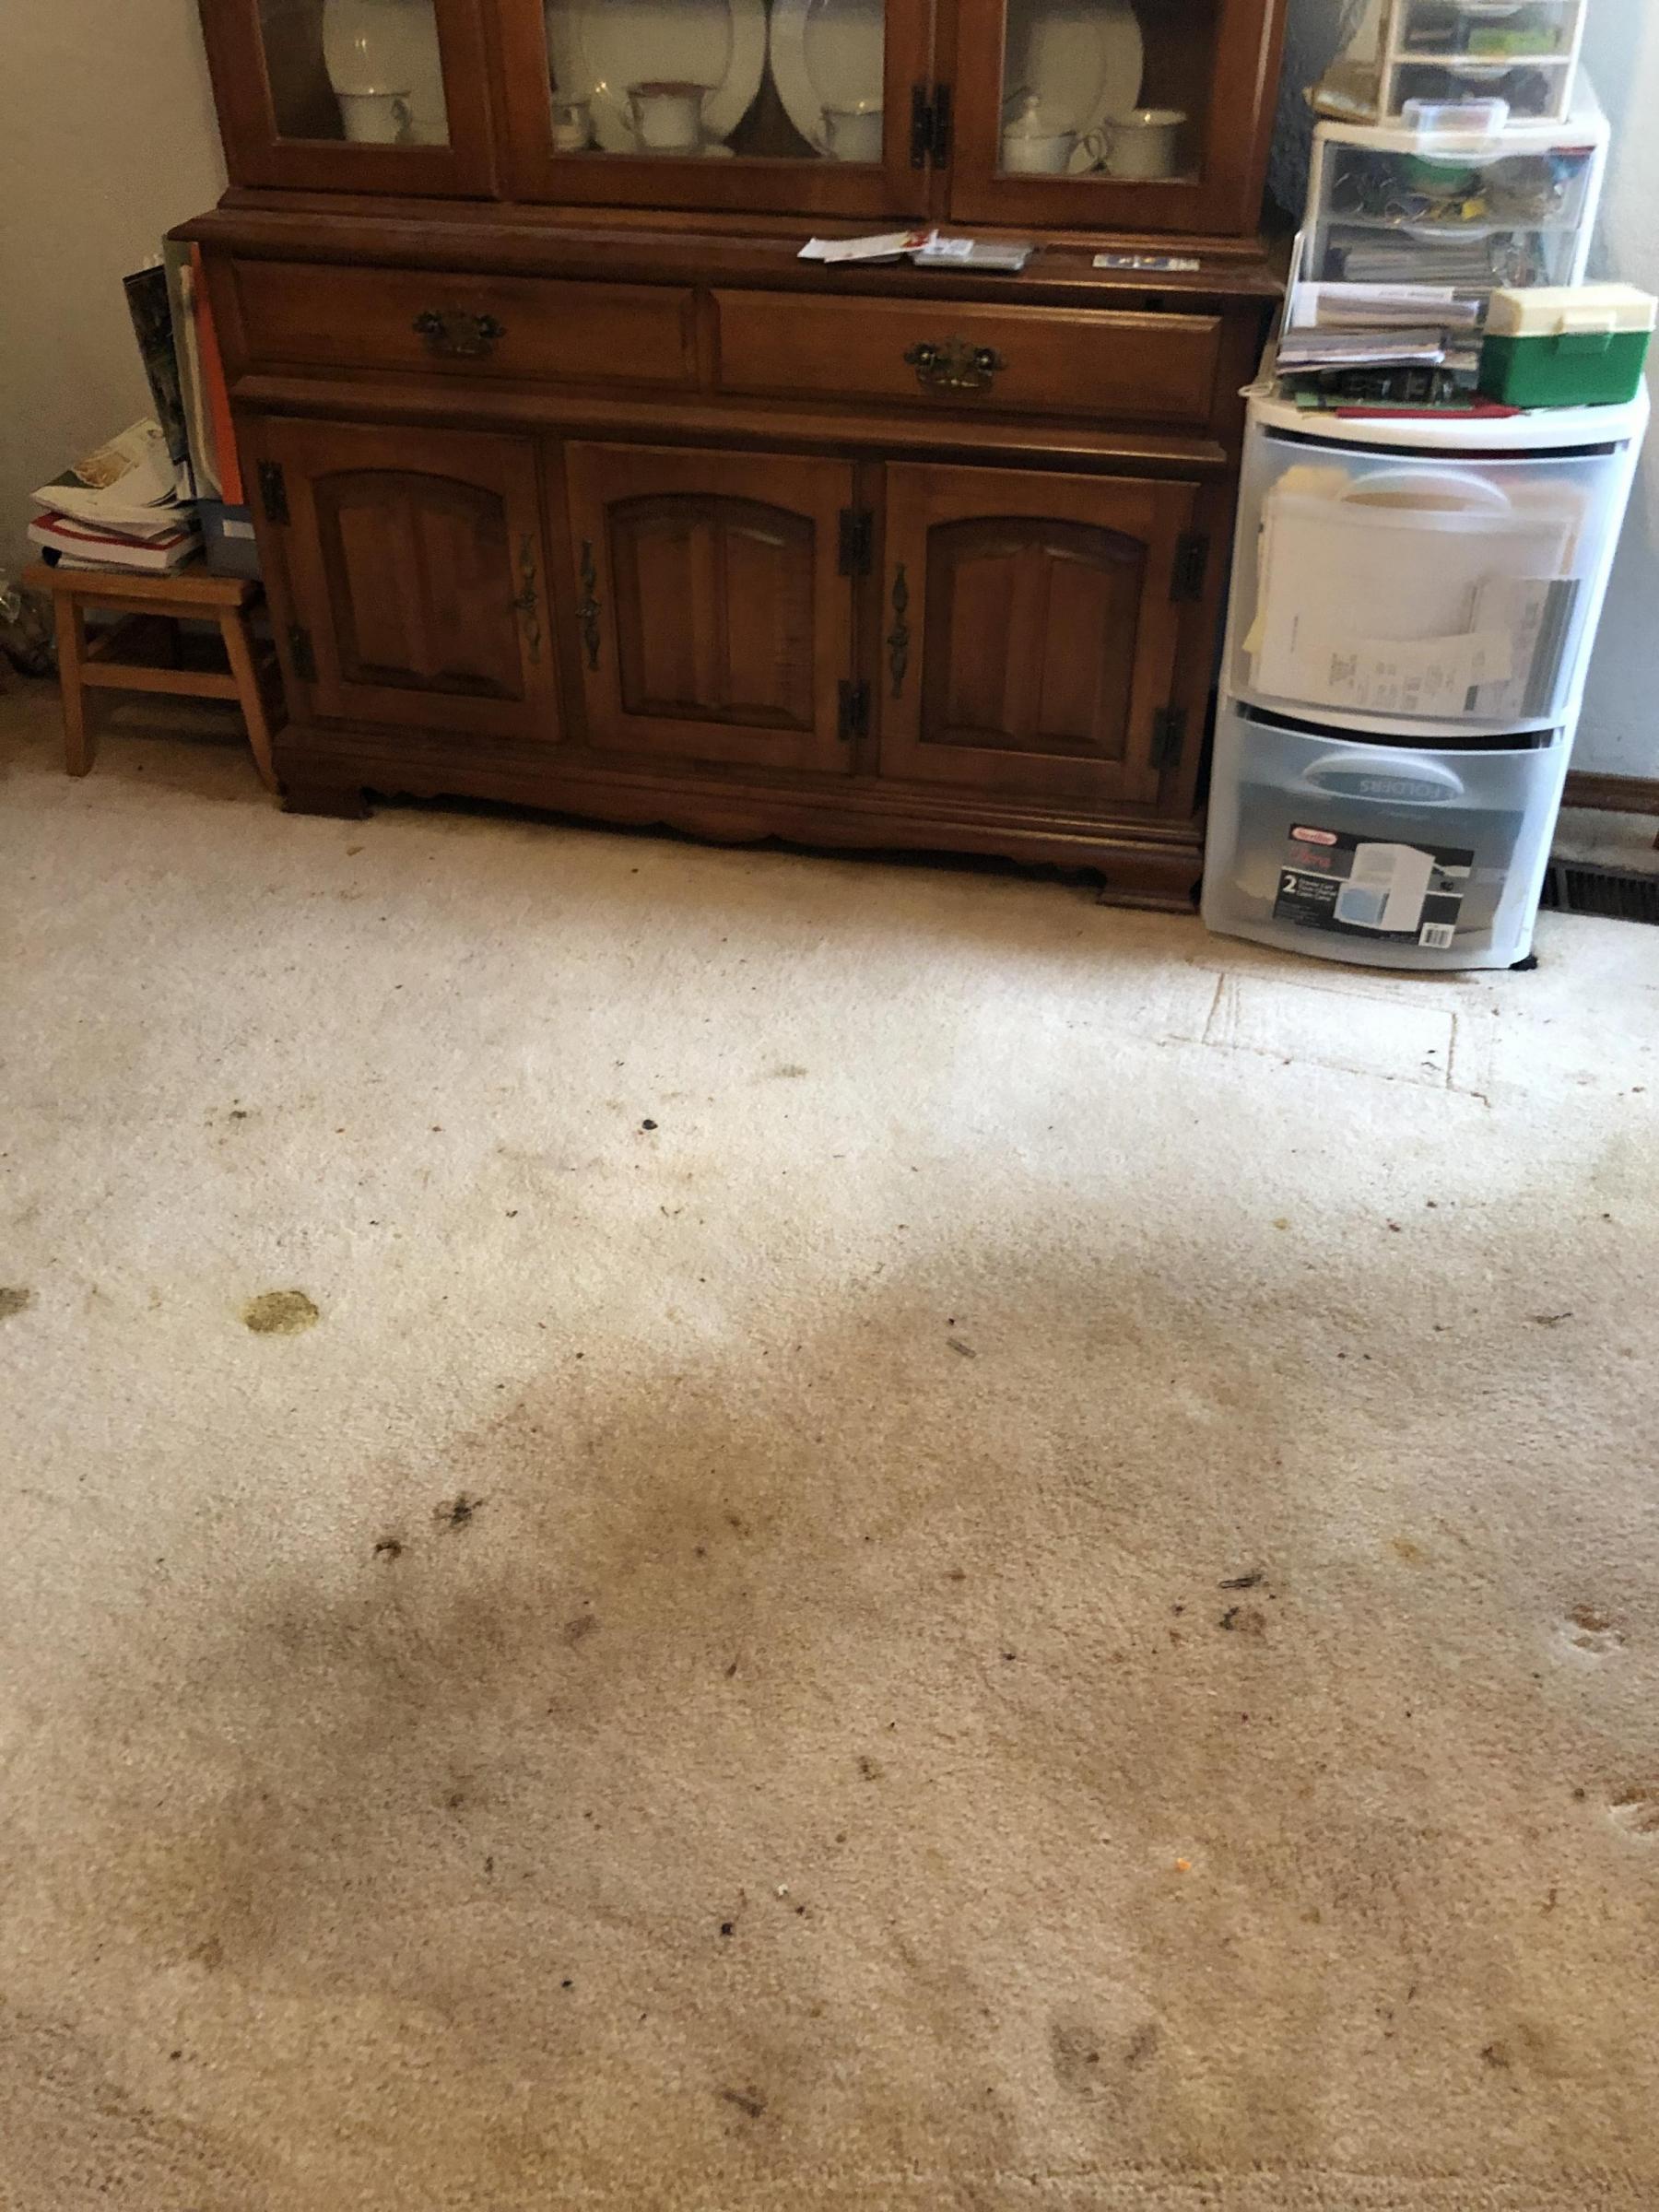 Prescott Valley Carpet Cleaning. Why My Carpet Looks Grimy?